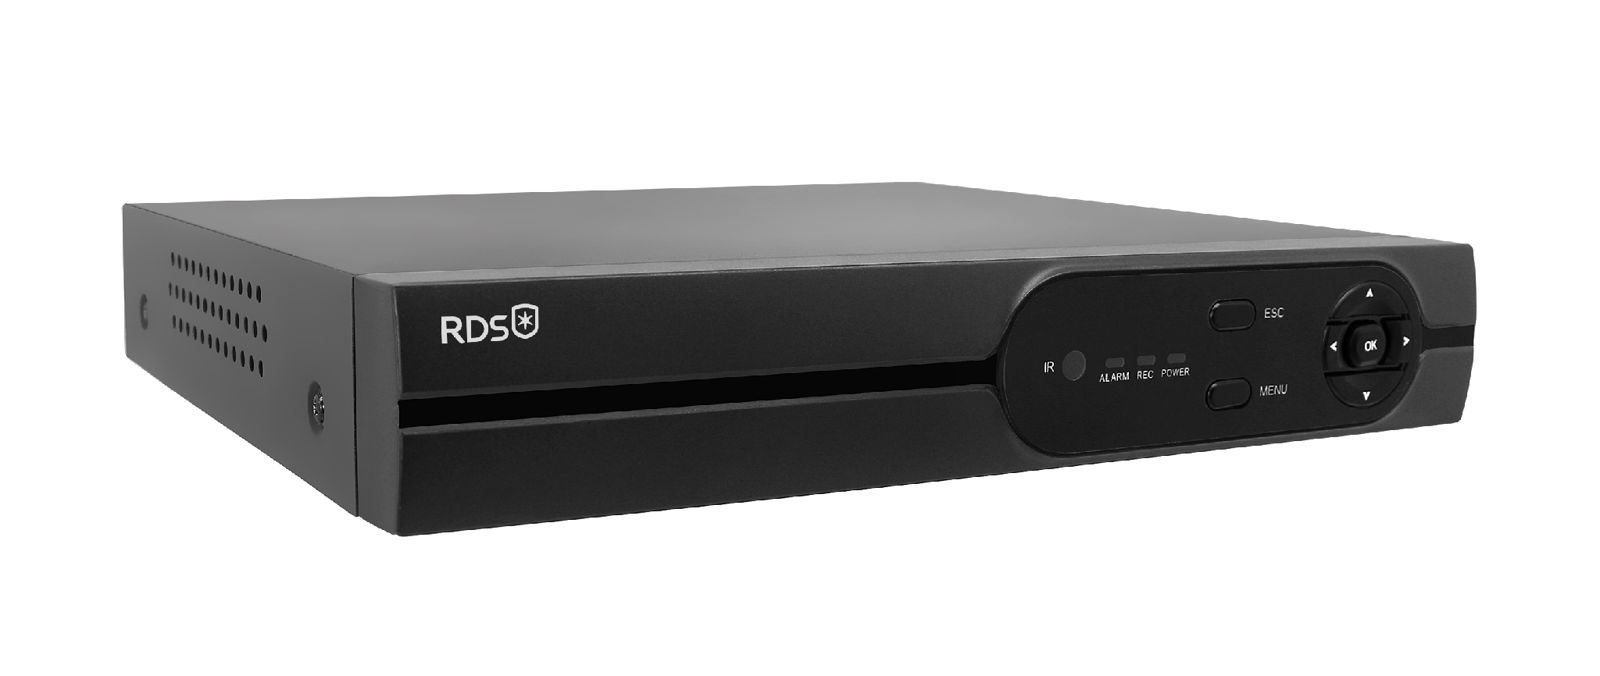 Promotion 5 in 1 recorder 4CH 1080N DVR XVR Support 1HDD at USD23